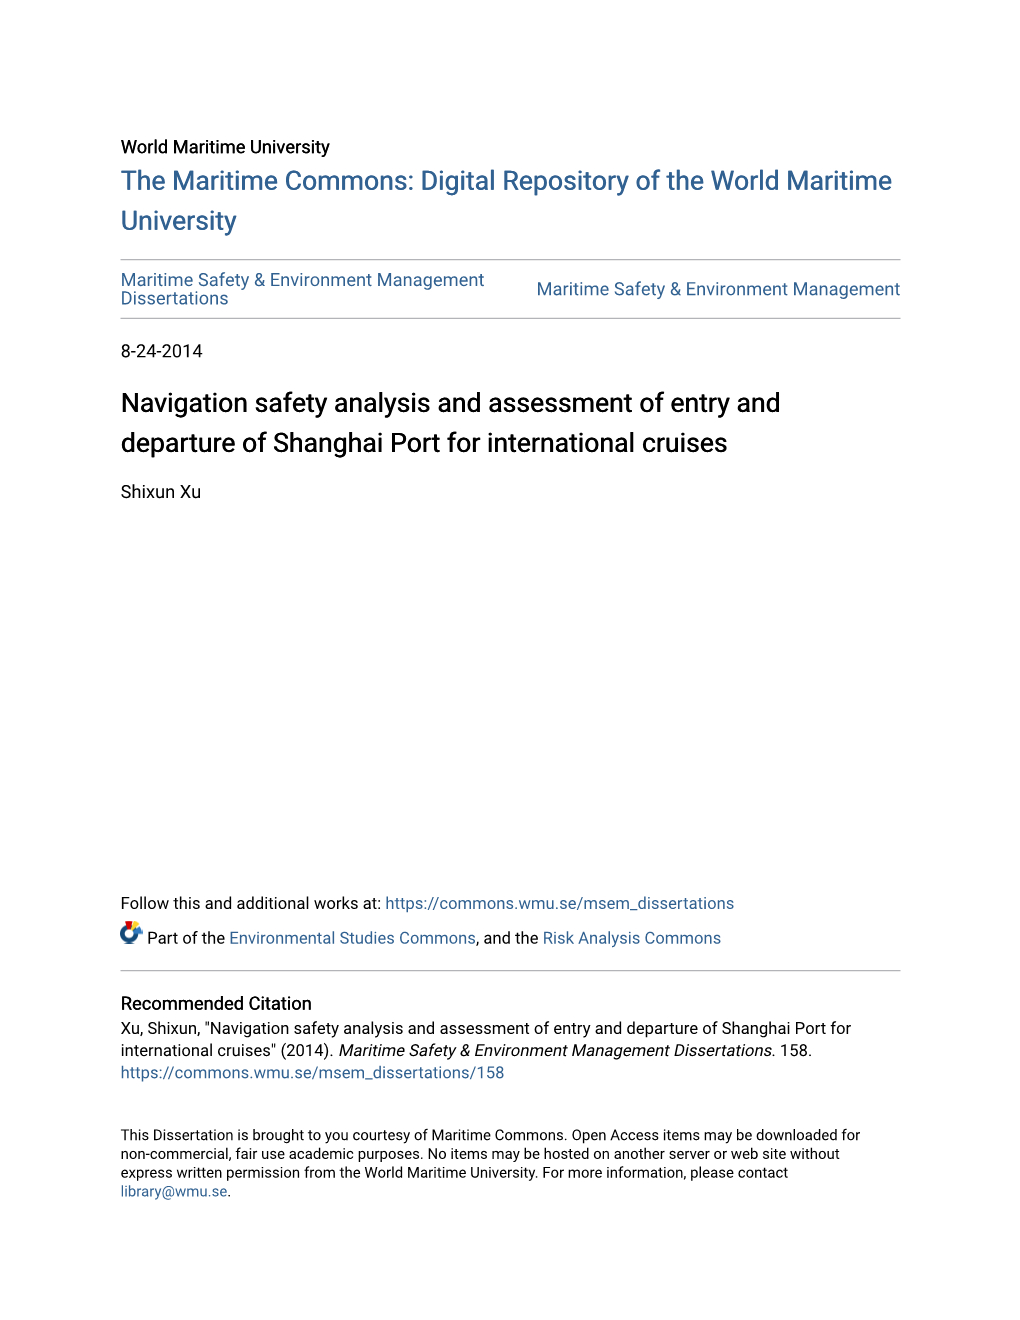 Navigation Safety Analysis and Assessment of Entry and Departure of Shanghai Port for International Cruises